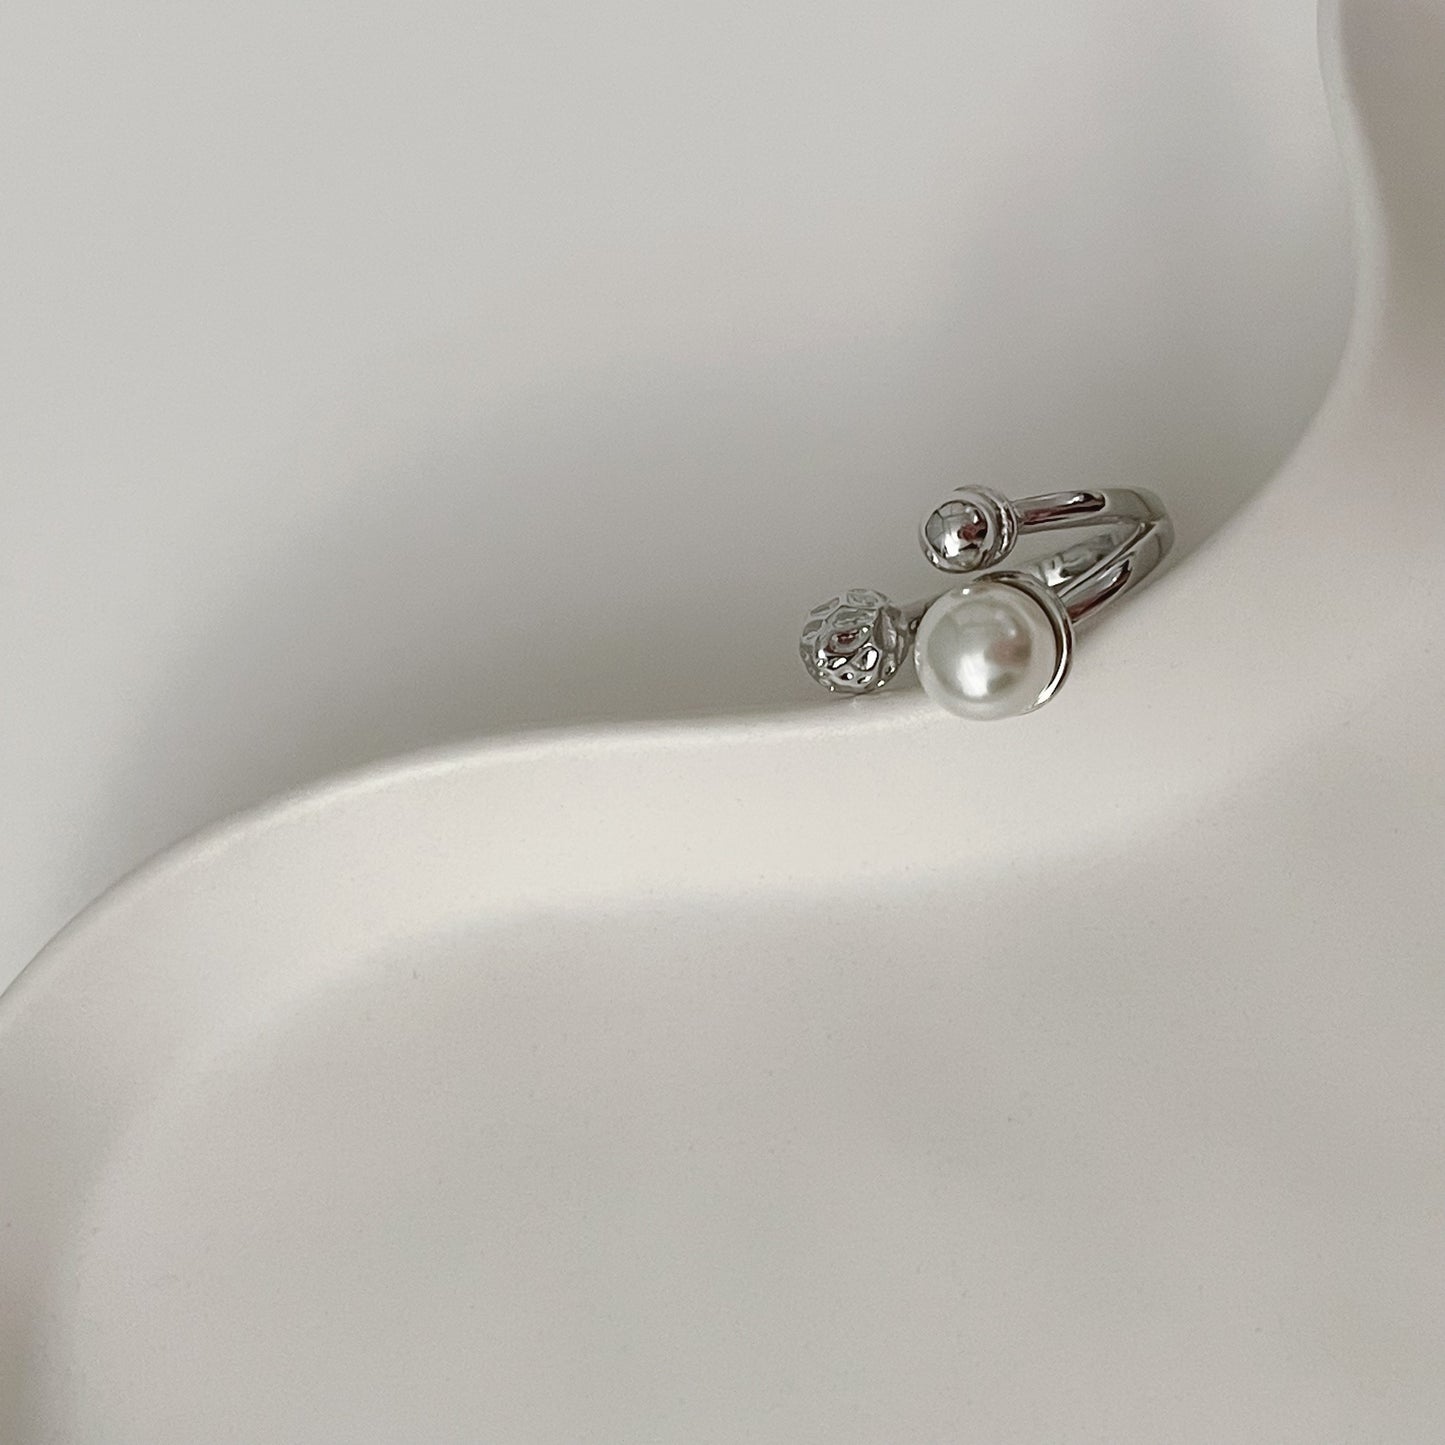 Handmade pearl top open ring